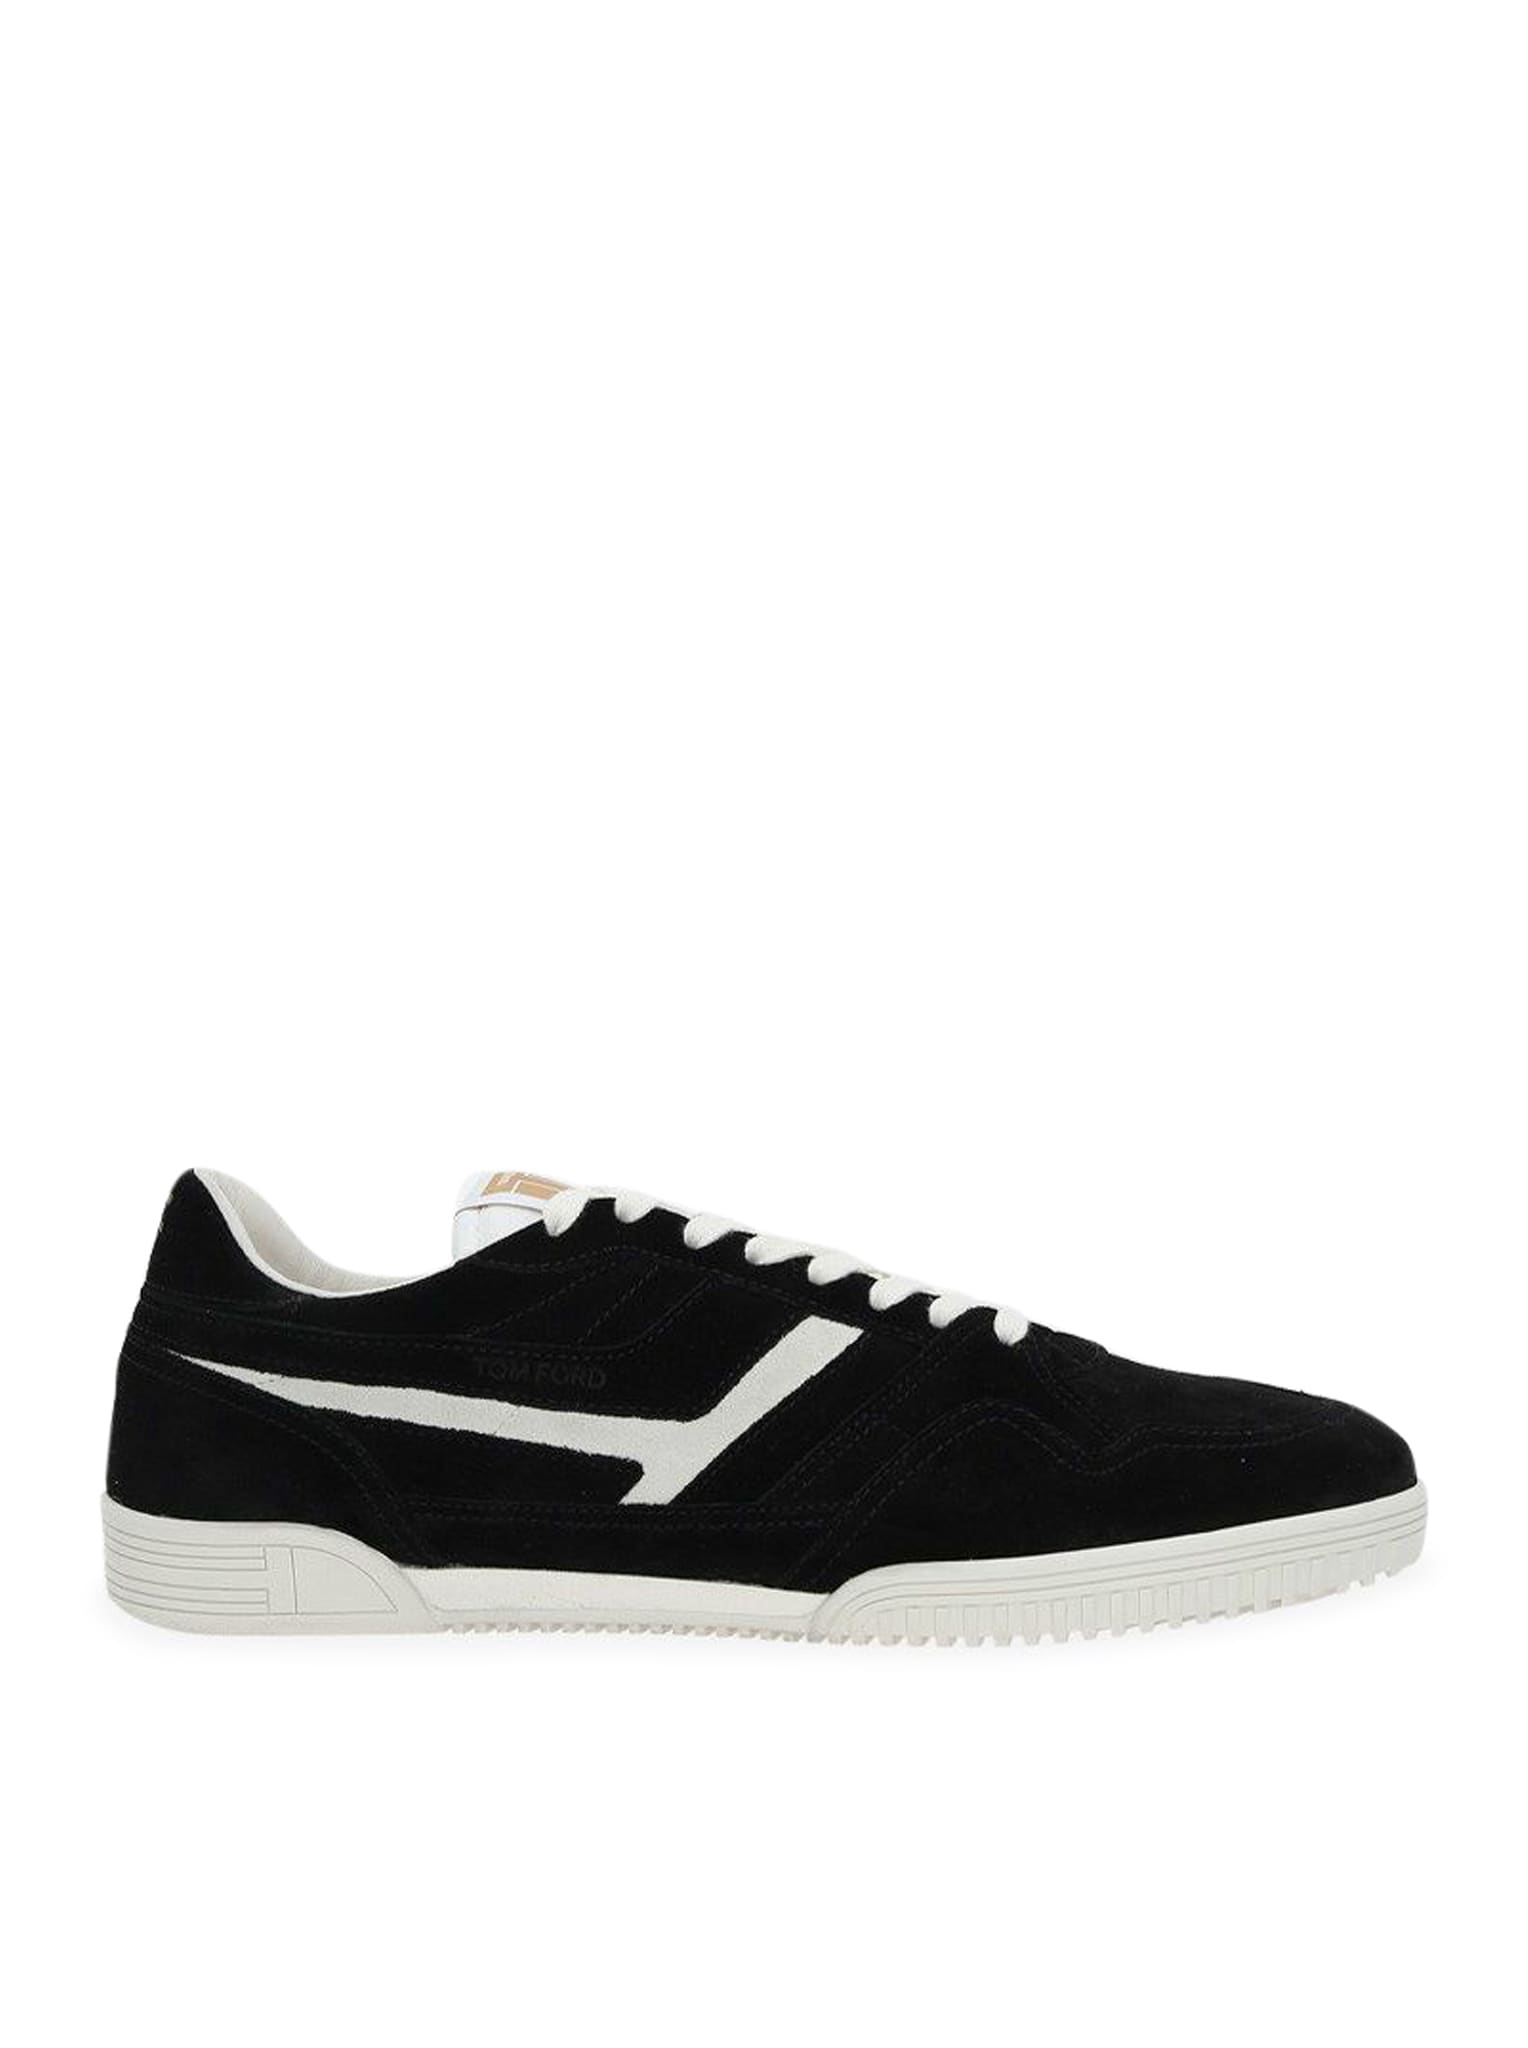 Tom Ford Suede + Kid Leather Low Top Sneakers